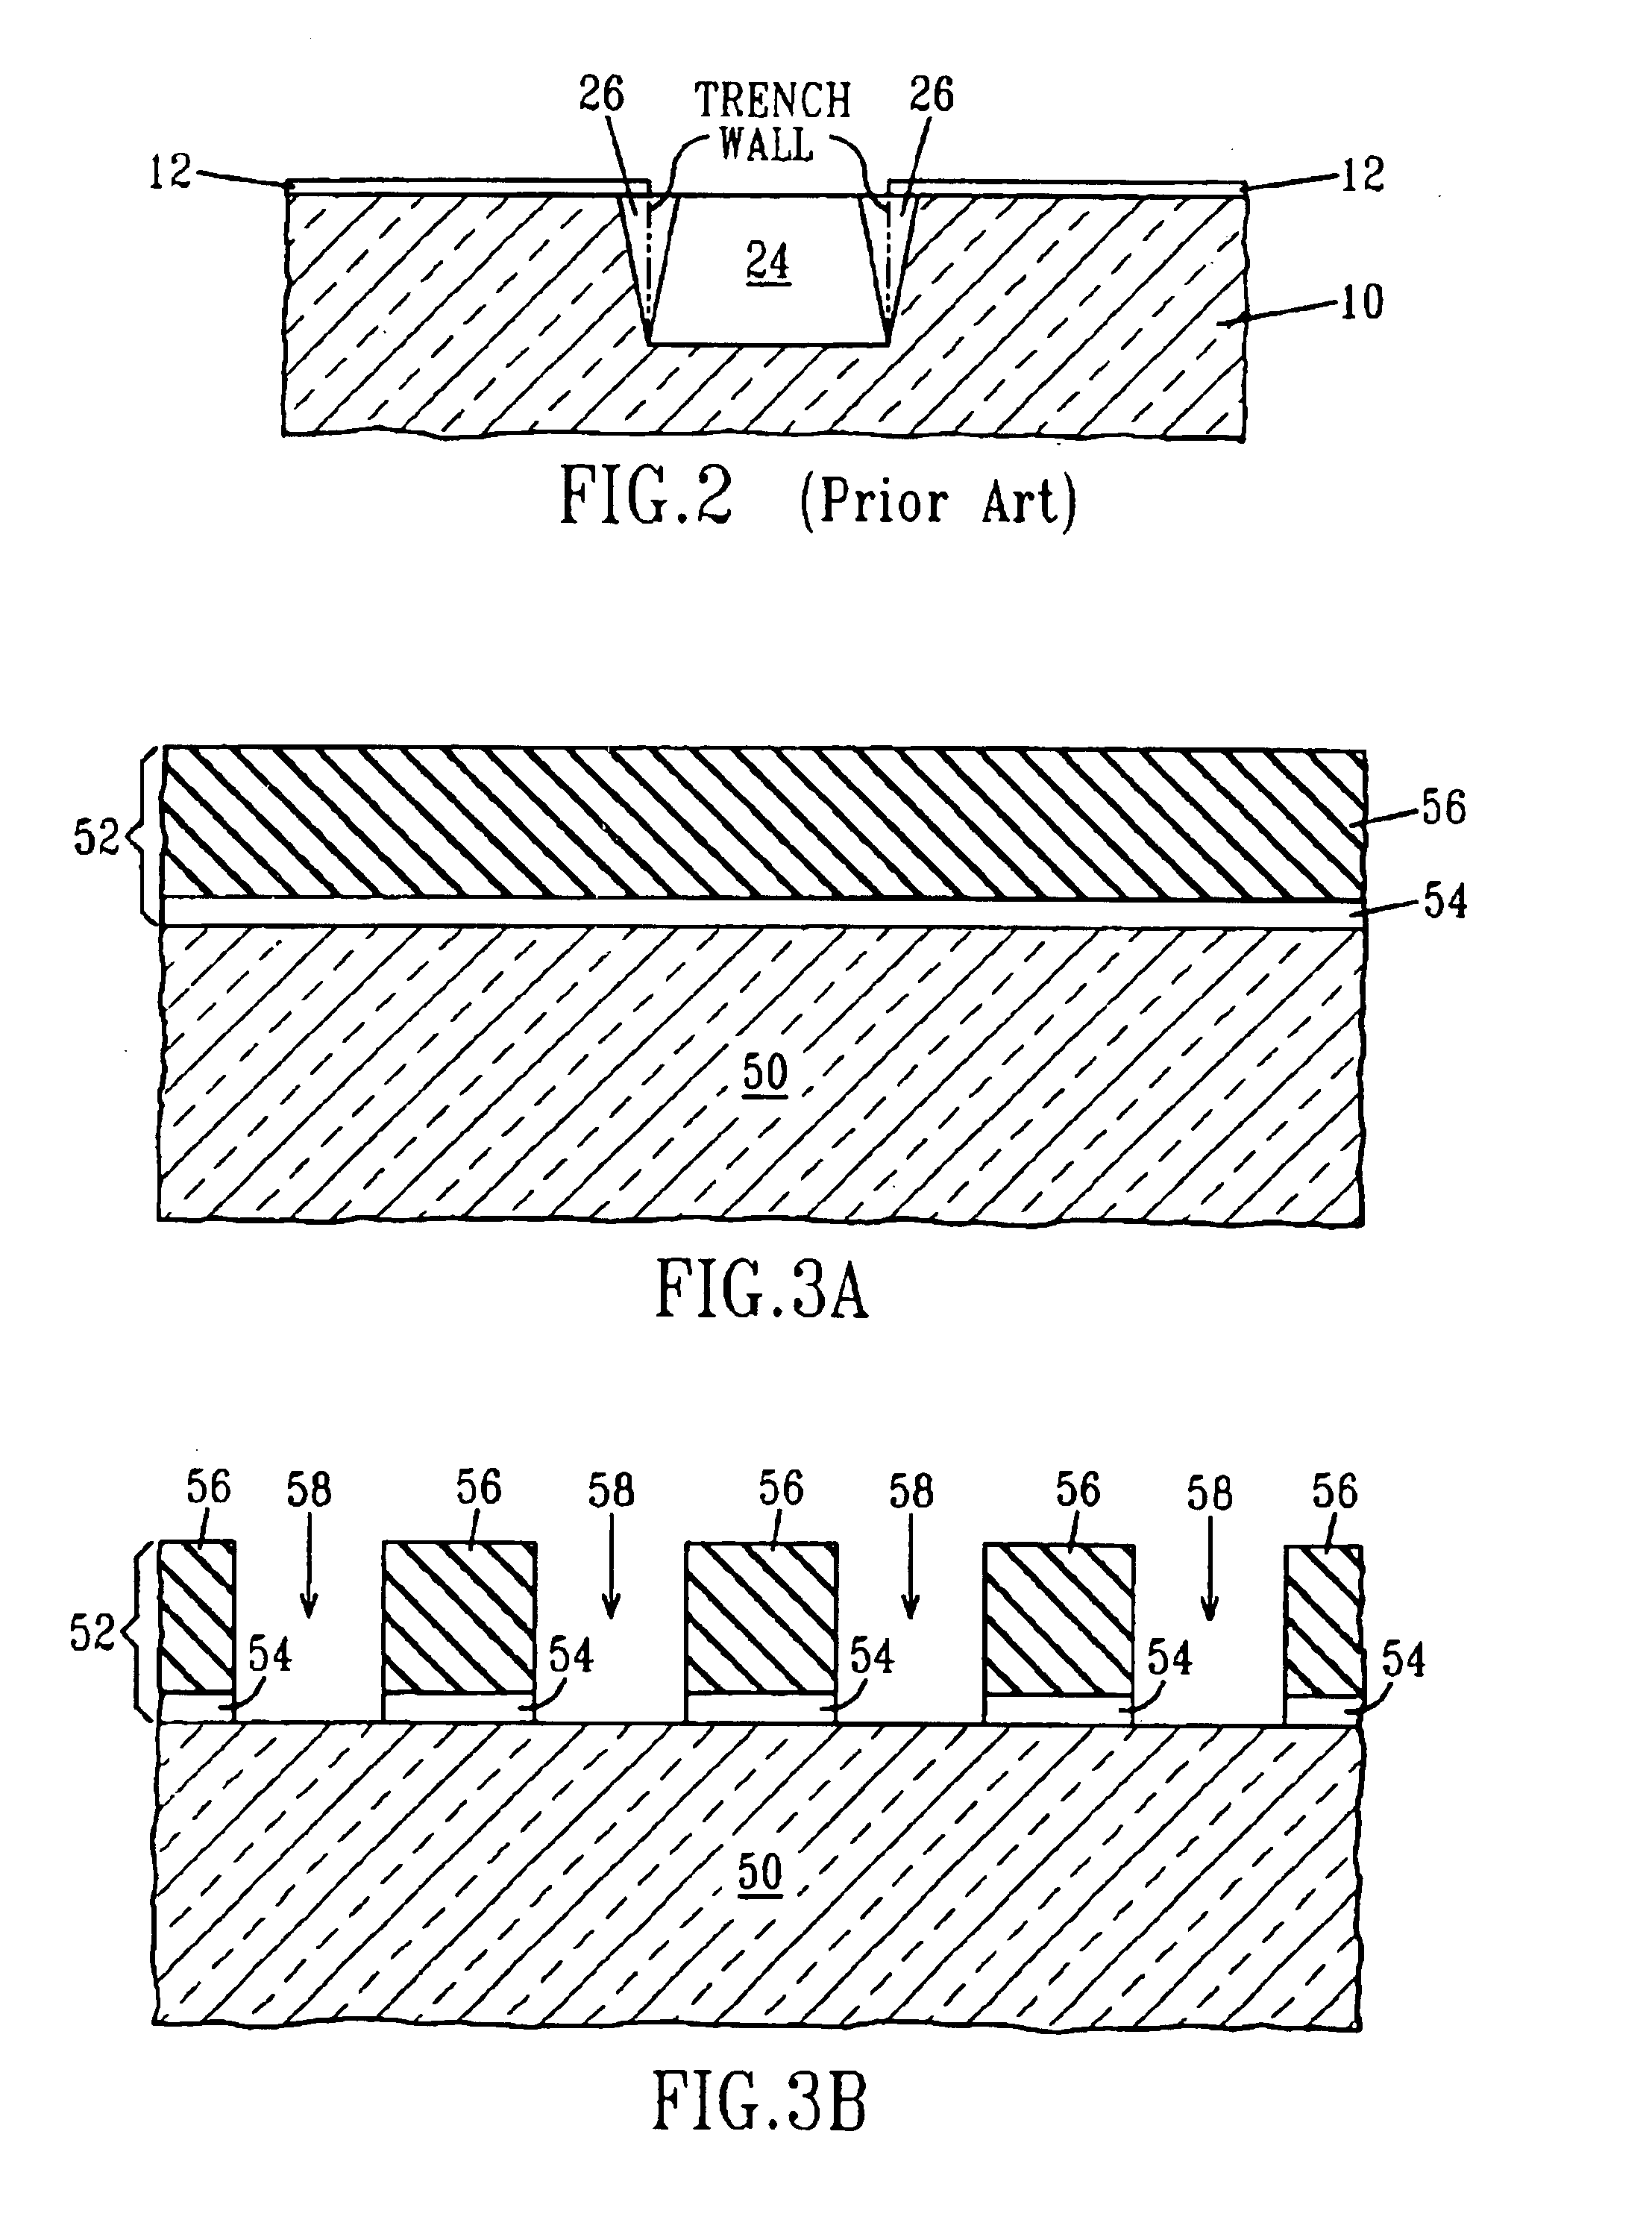 STI stress modification by nitrogen plasma treatment for improving performance in small width devices